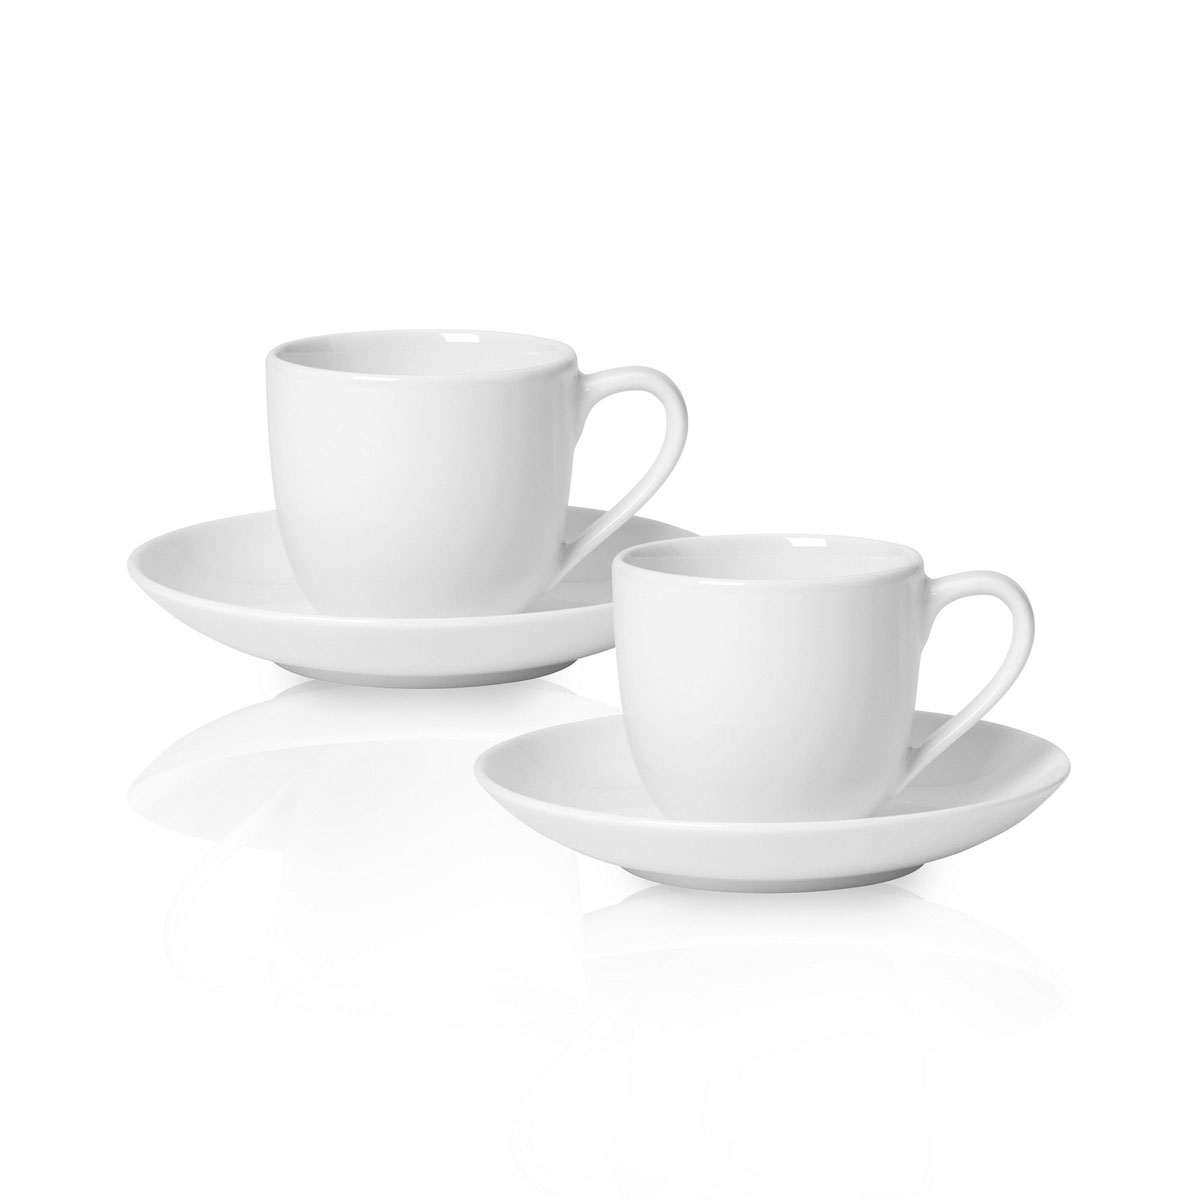 Villeroy and Boch For Me Espresso Cup and Saucer 4 Piece Set